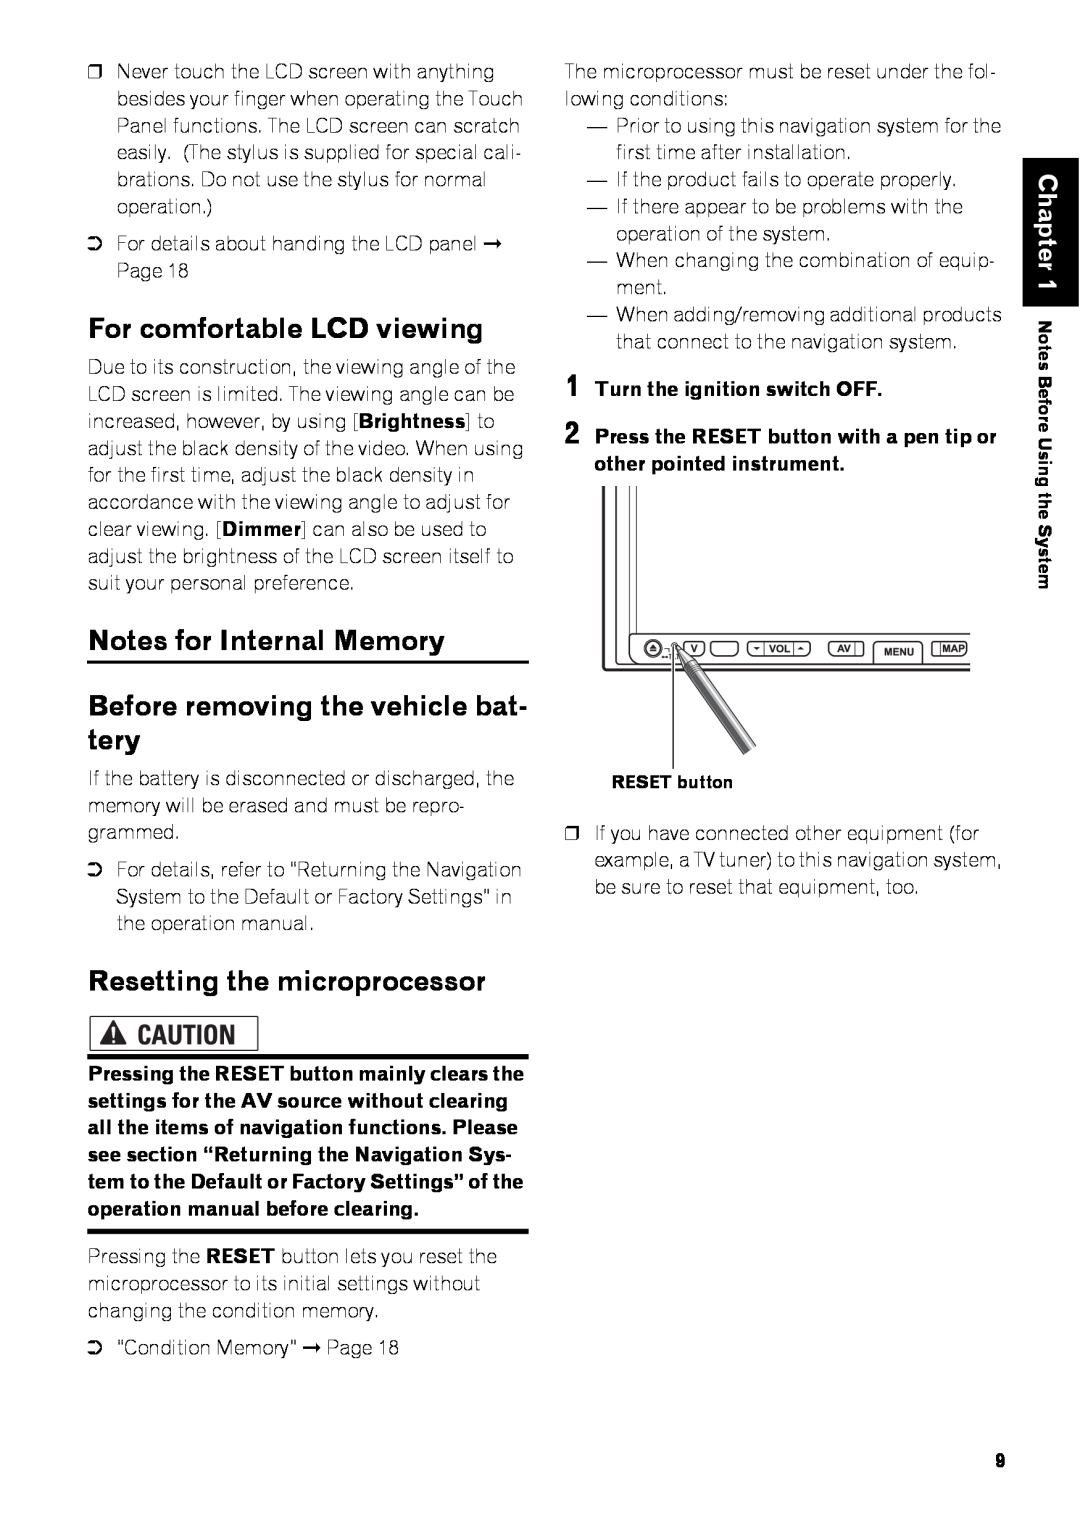 Pioneer AVIC-Z3 manual For comfortable LCD viewing, Notes for Internal Memory Before removing the vehicle bat- tery 